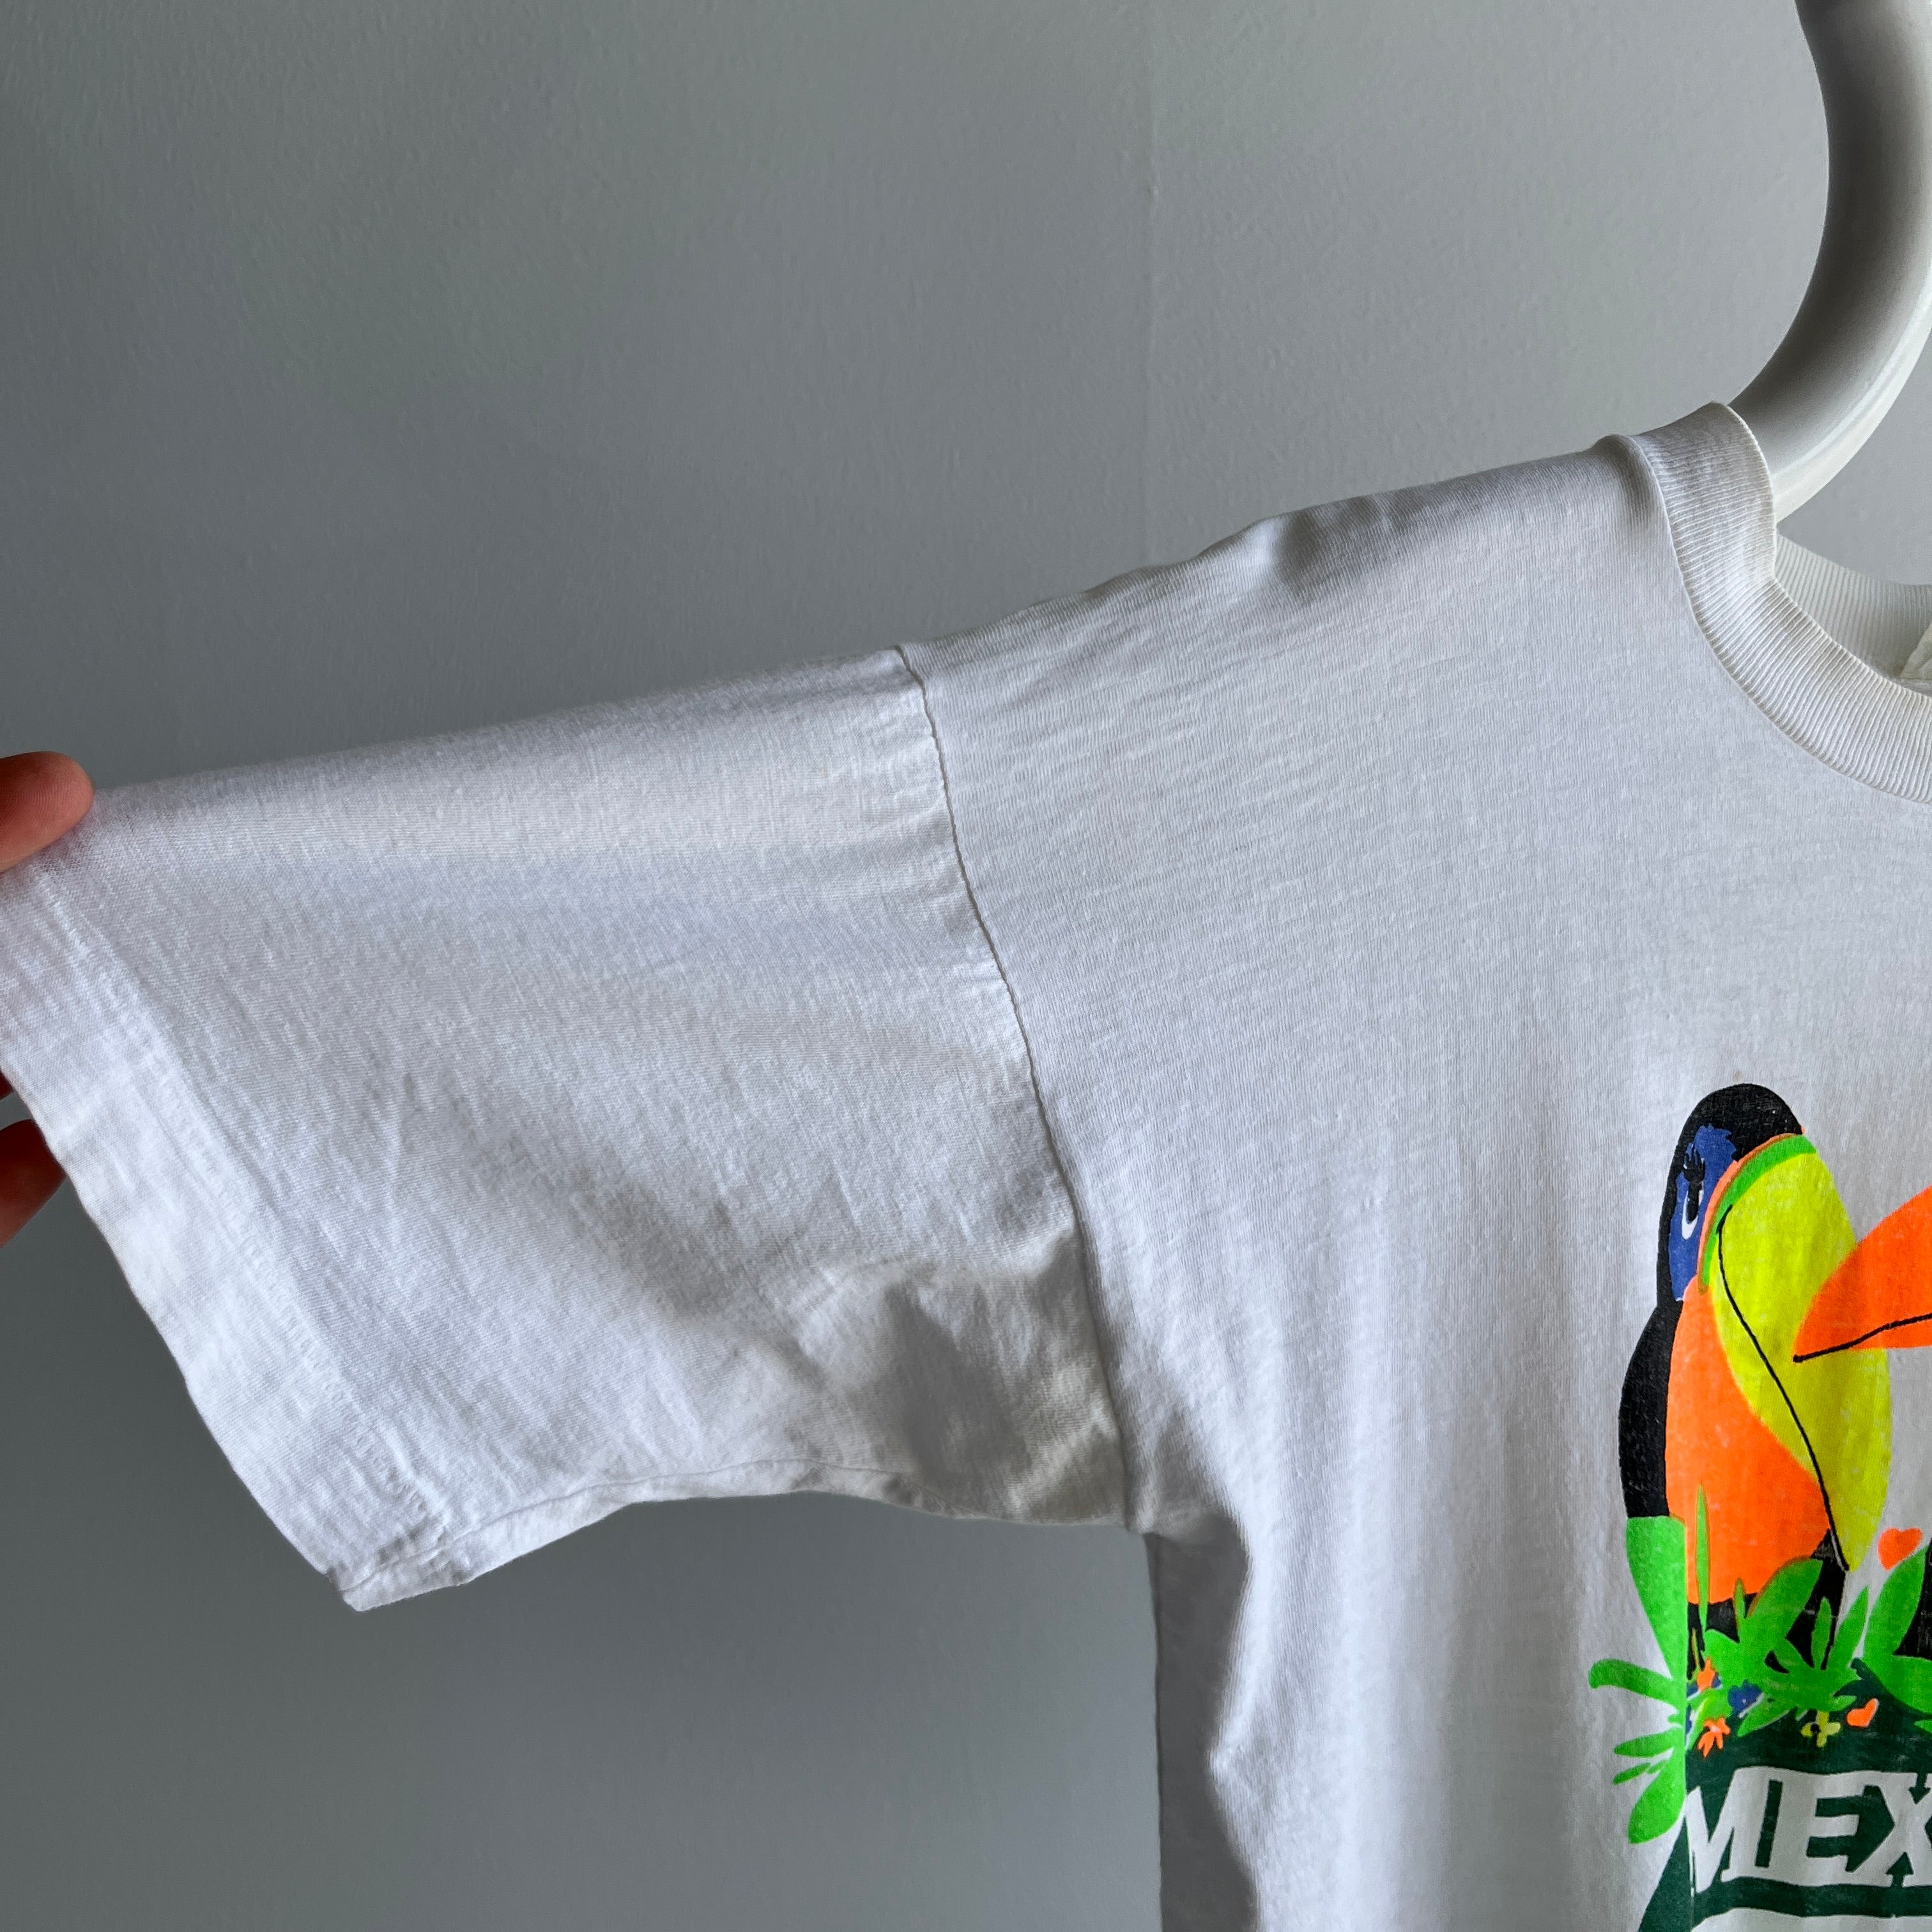 1980s Toucan for Can-Cun Mexico T-Shirt